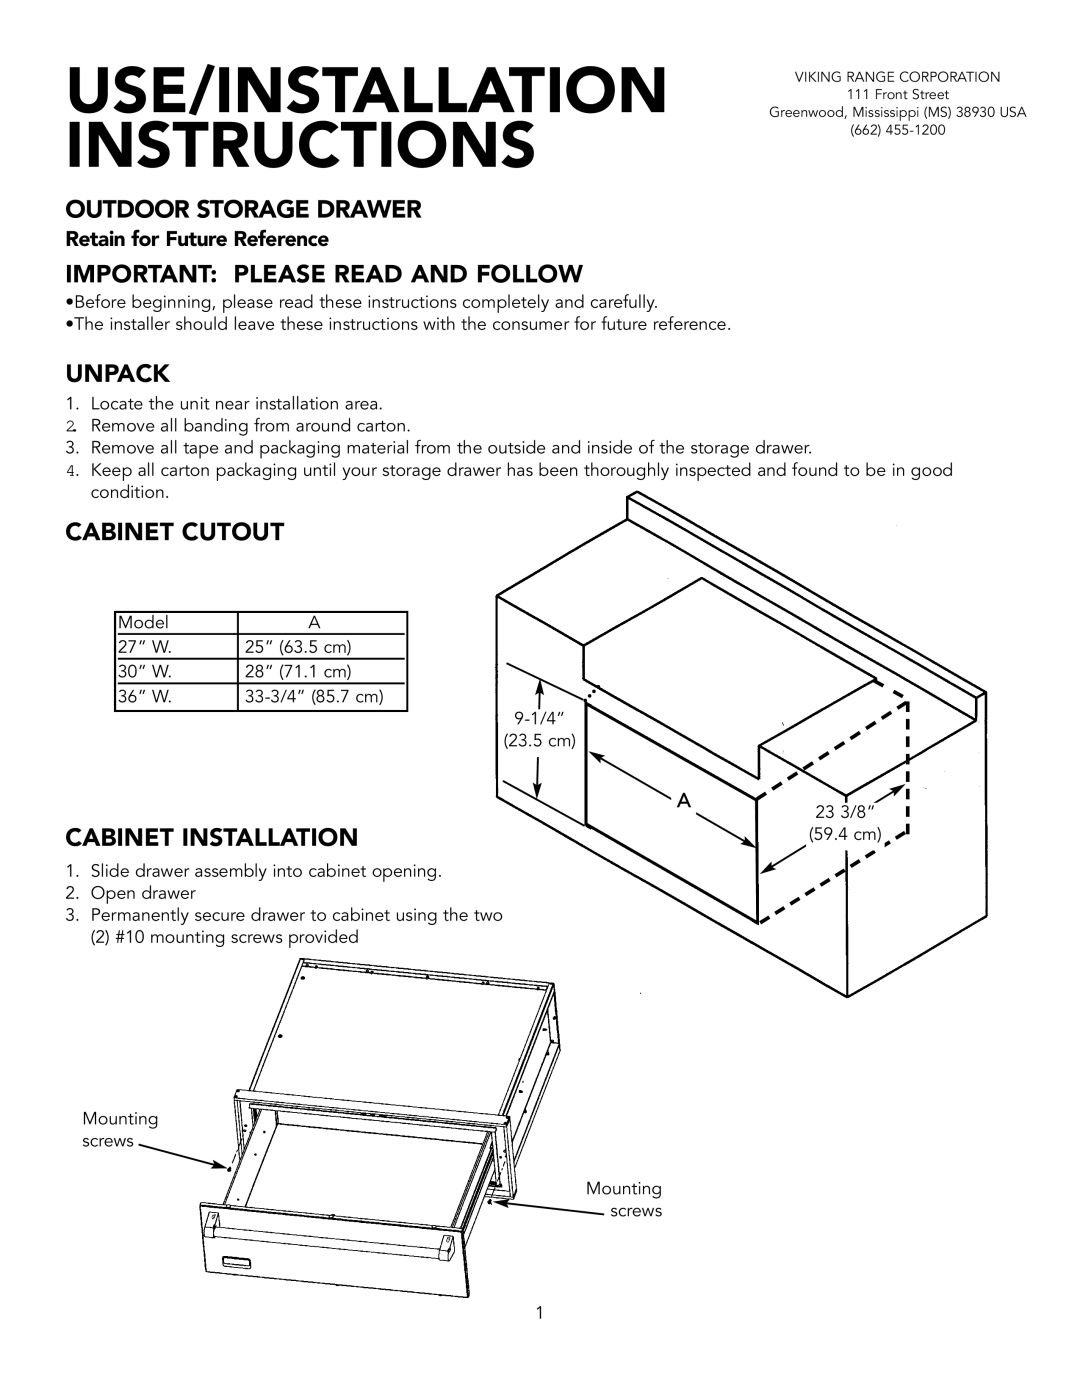 Viking 36-inch W, 27-inch W installation instructions Outdoor Storage Drawer, Important Please Read And Follow, Unpack 